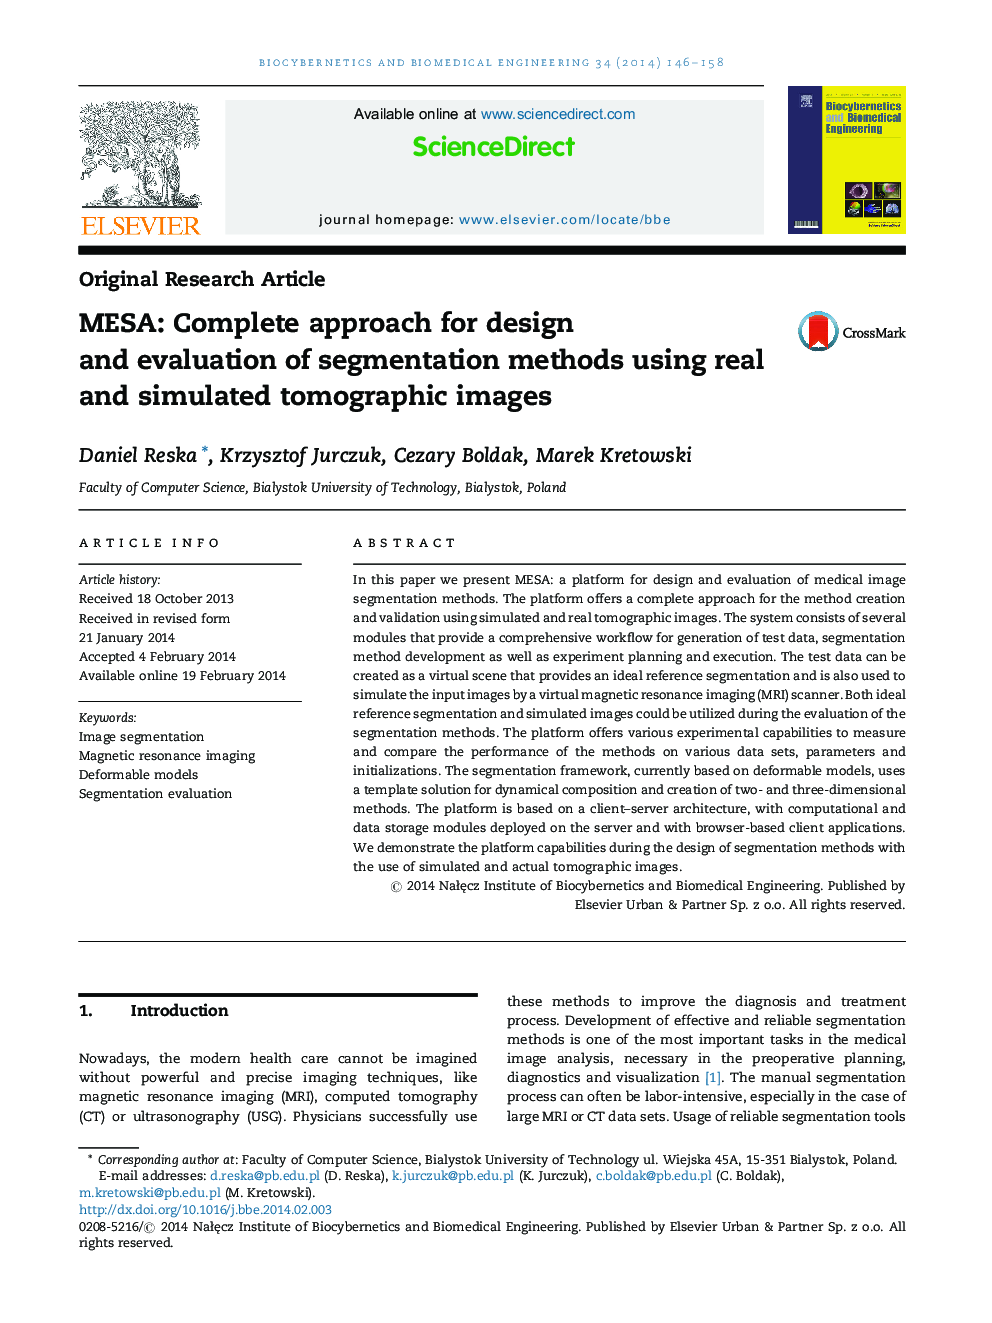 MESA: Complete approach for design and evaluation of segmentation methods using real and simulated tomographic images